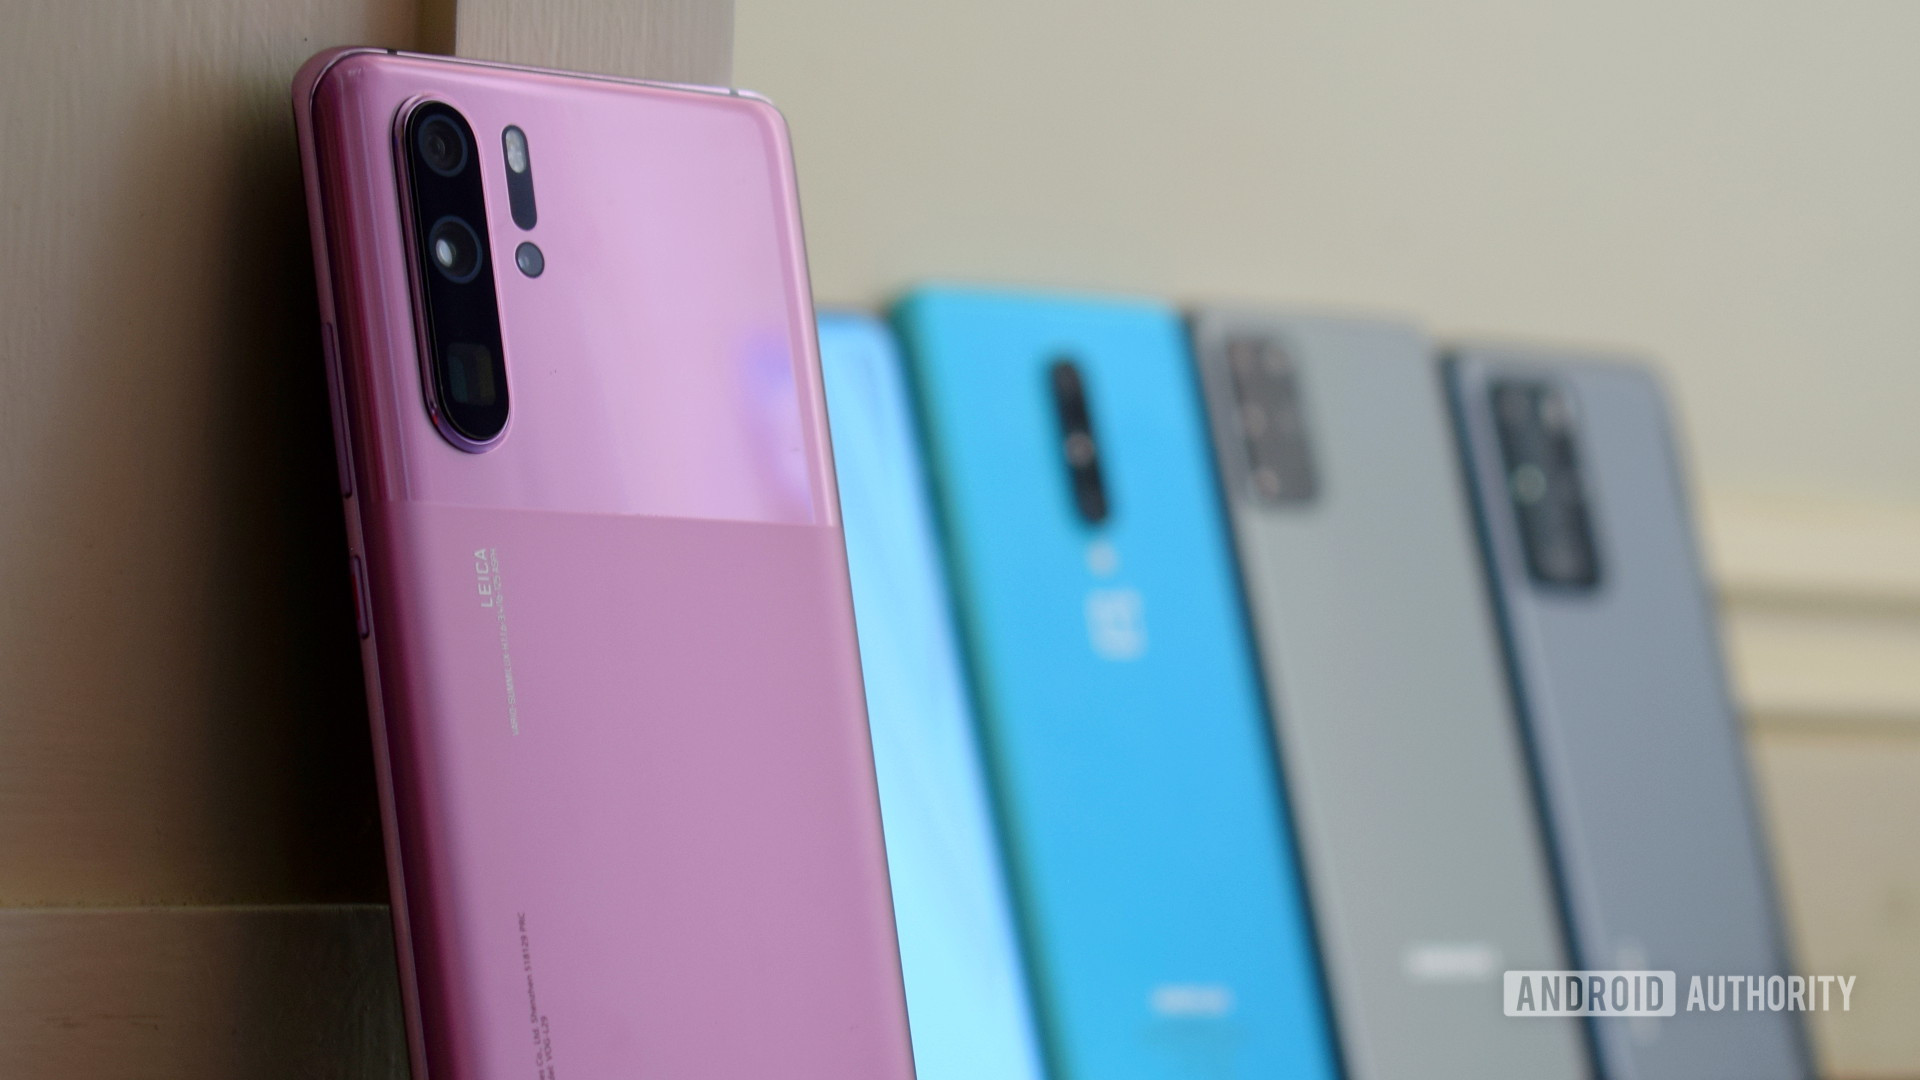 intercambiar Infidelidad Abandonado HUAWEI P30 Pro long-term review: Still worth buying? - Android Authority